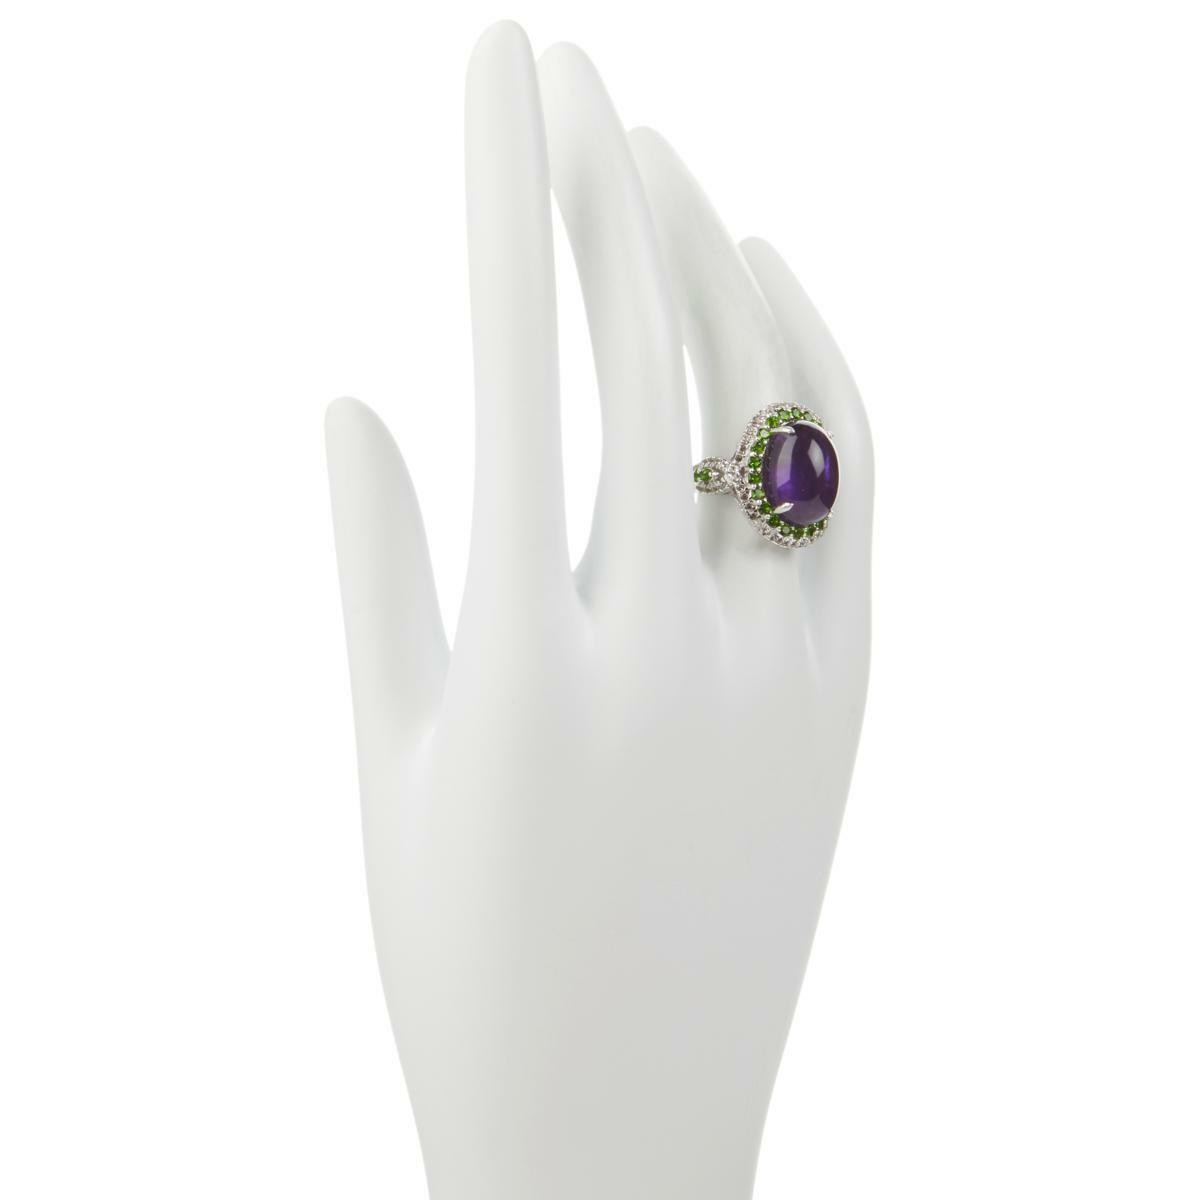 Colleen Lopez Amethyst, Chrome Diopside and White Topaz Ring, Size 5